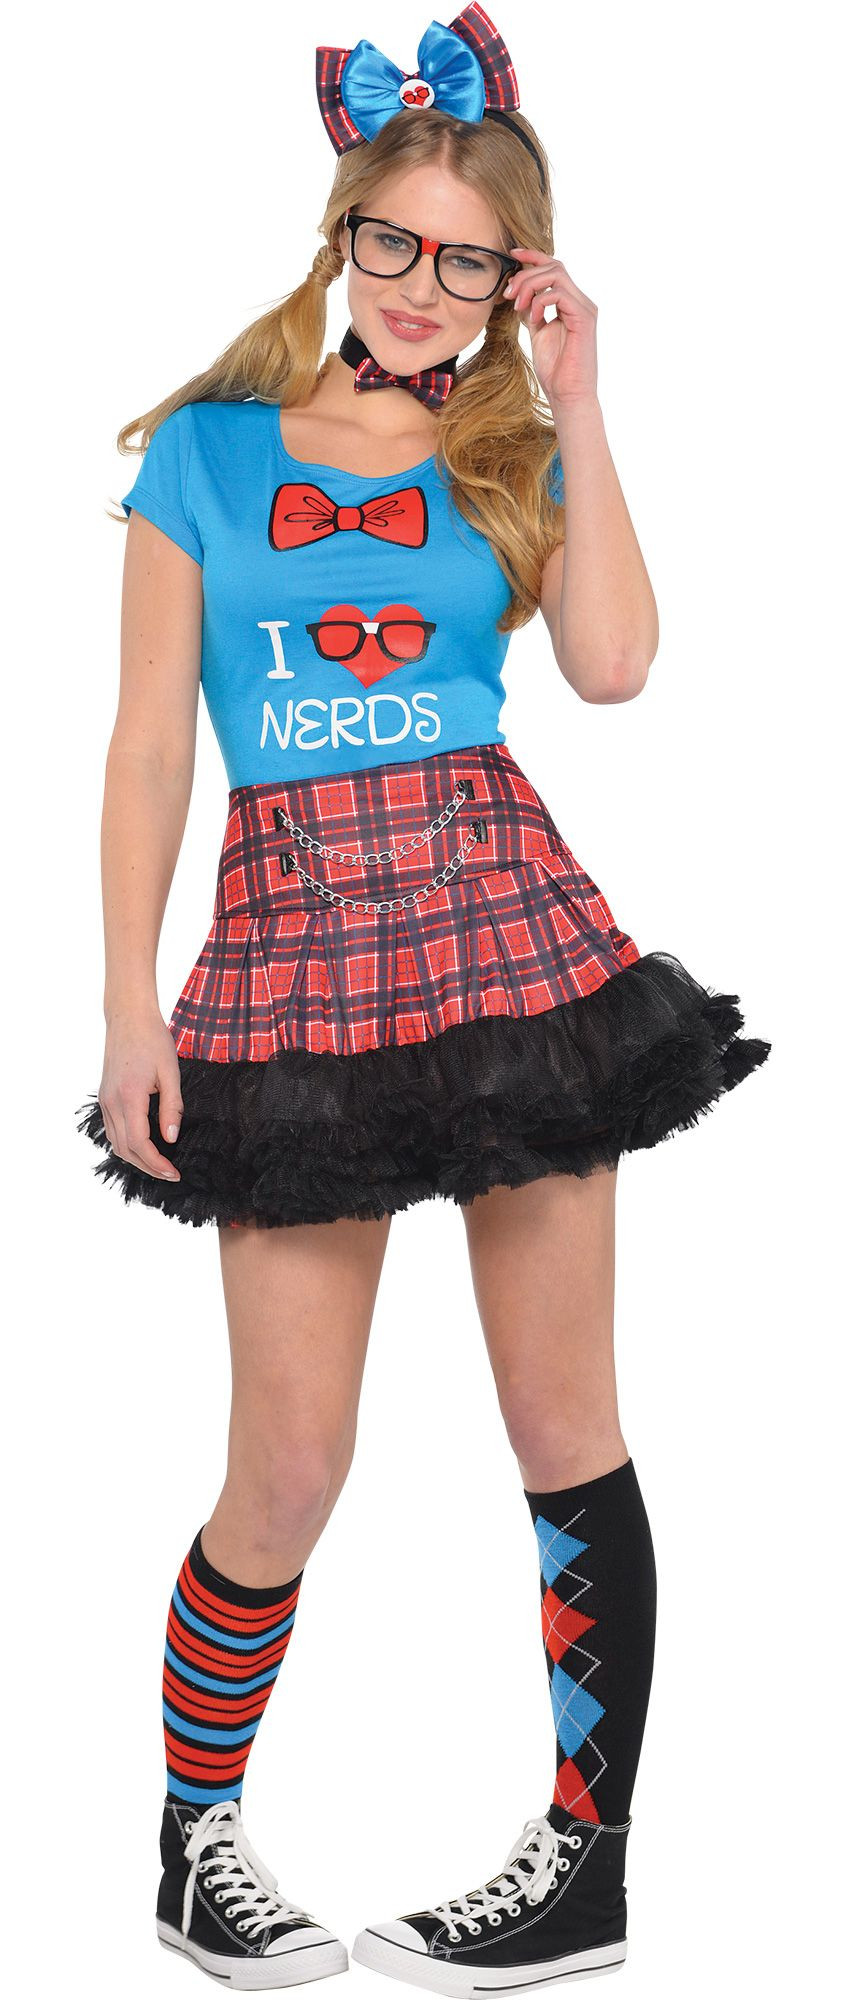 The Best Party City Halloween Costumes Ideas Home, Family, Style and